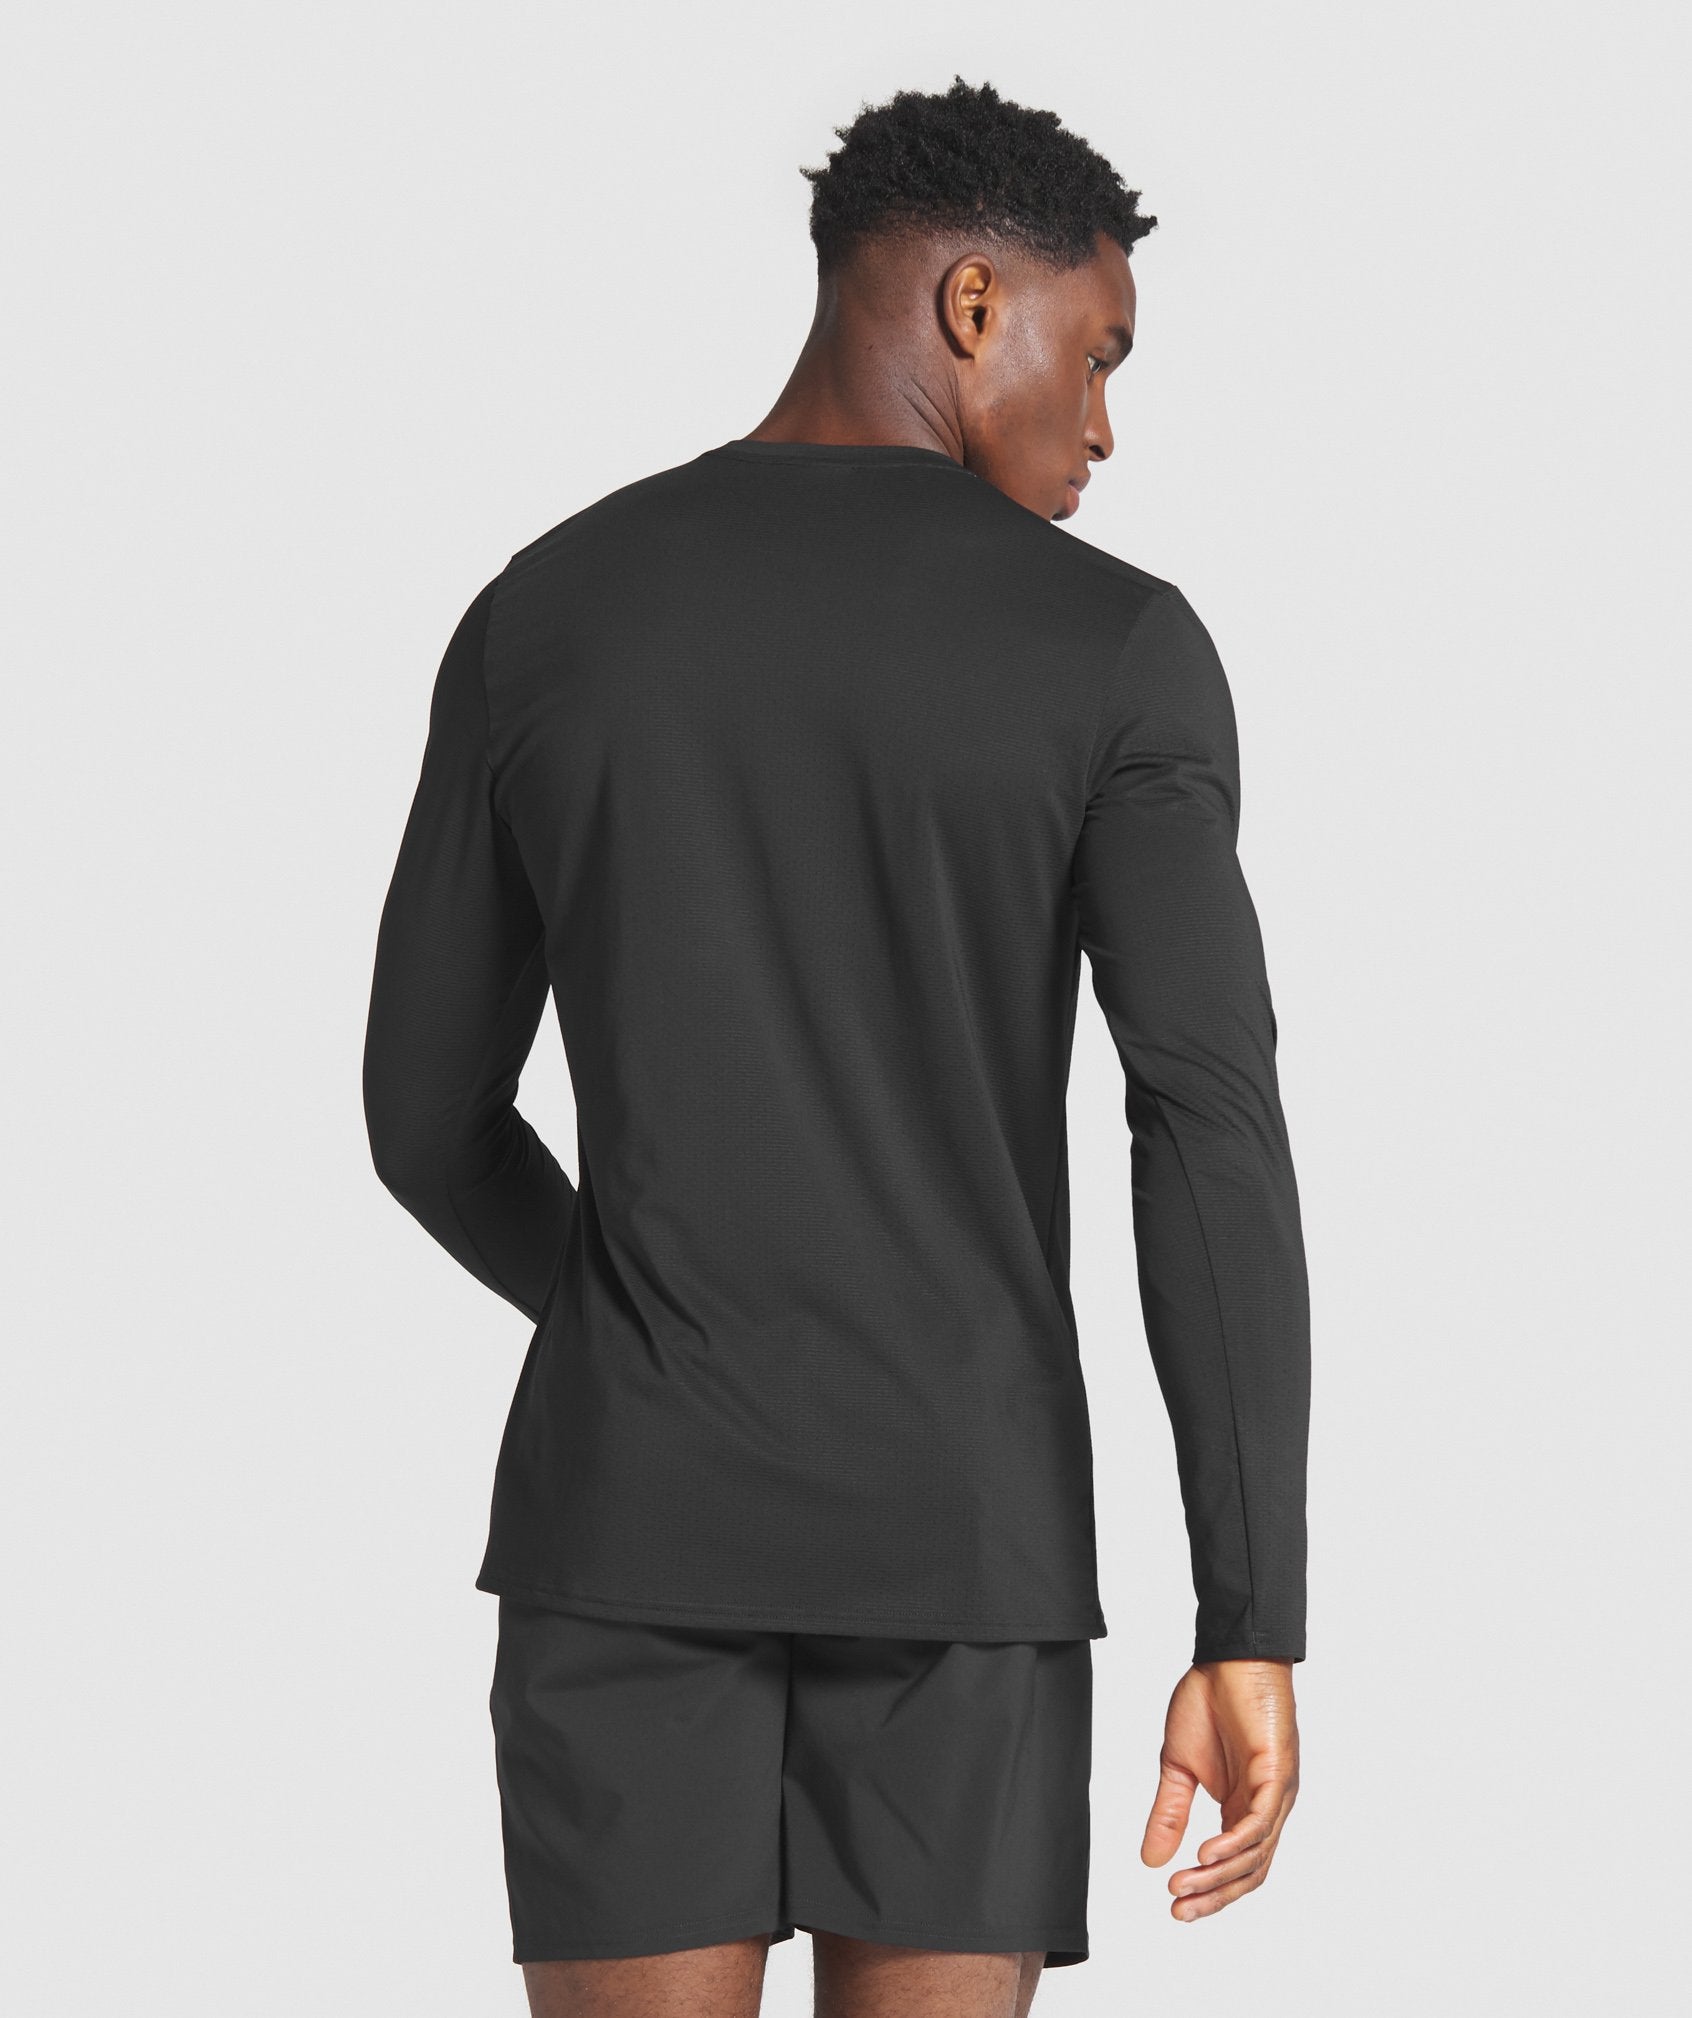 Arrival Long Sleeve Graphic T-Shirt in Black - view 3